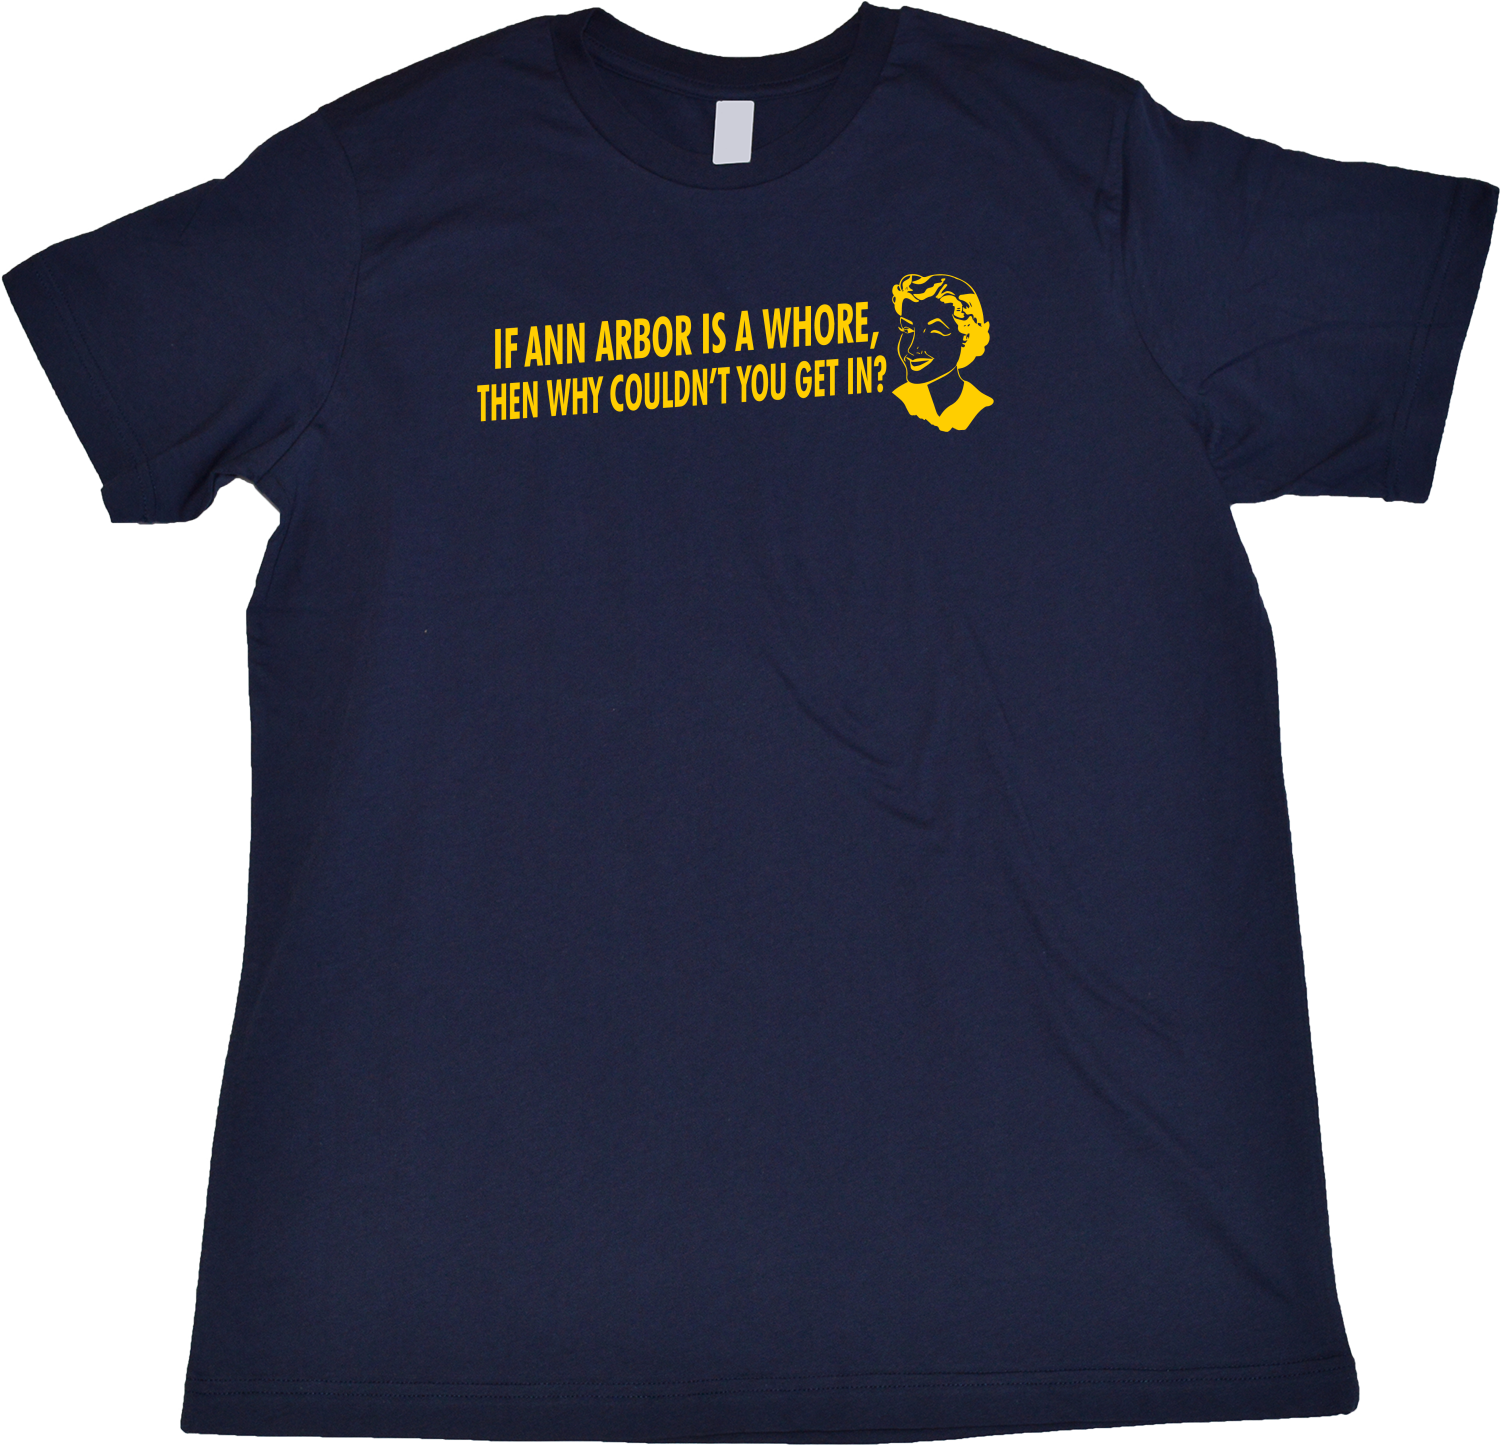 Standard Navy If Ann Arbor Is A Whore, Why Couldn't You Get In? - Football Fan T-shirt